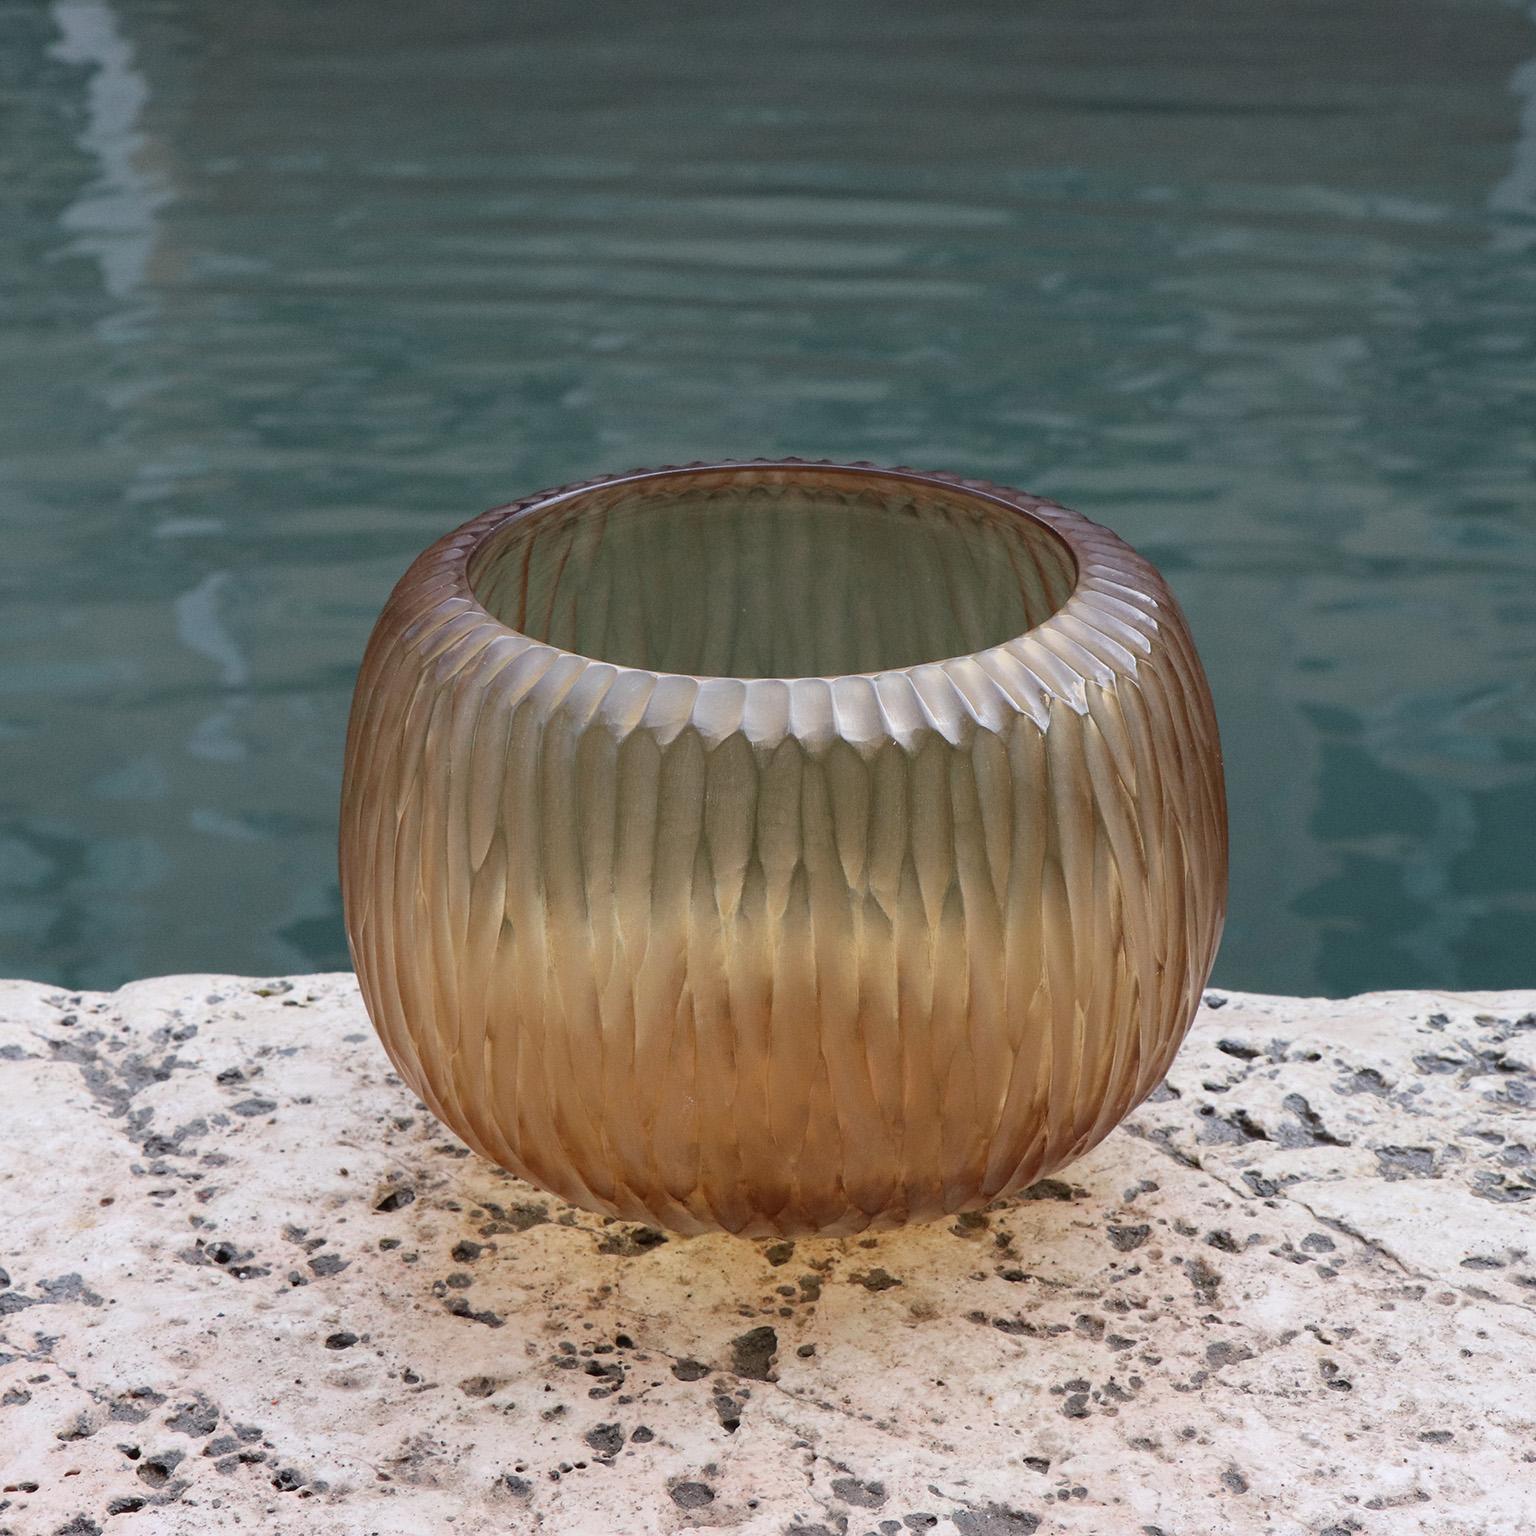 Playfully named Puffo this vase has a round ‘pouf-like’ shape. To achieve the desired form and dimensions the molten glass is first mouth blown. Once cooled the surface is transformed by a laborious cold carving process called ‘molatura’ lending the